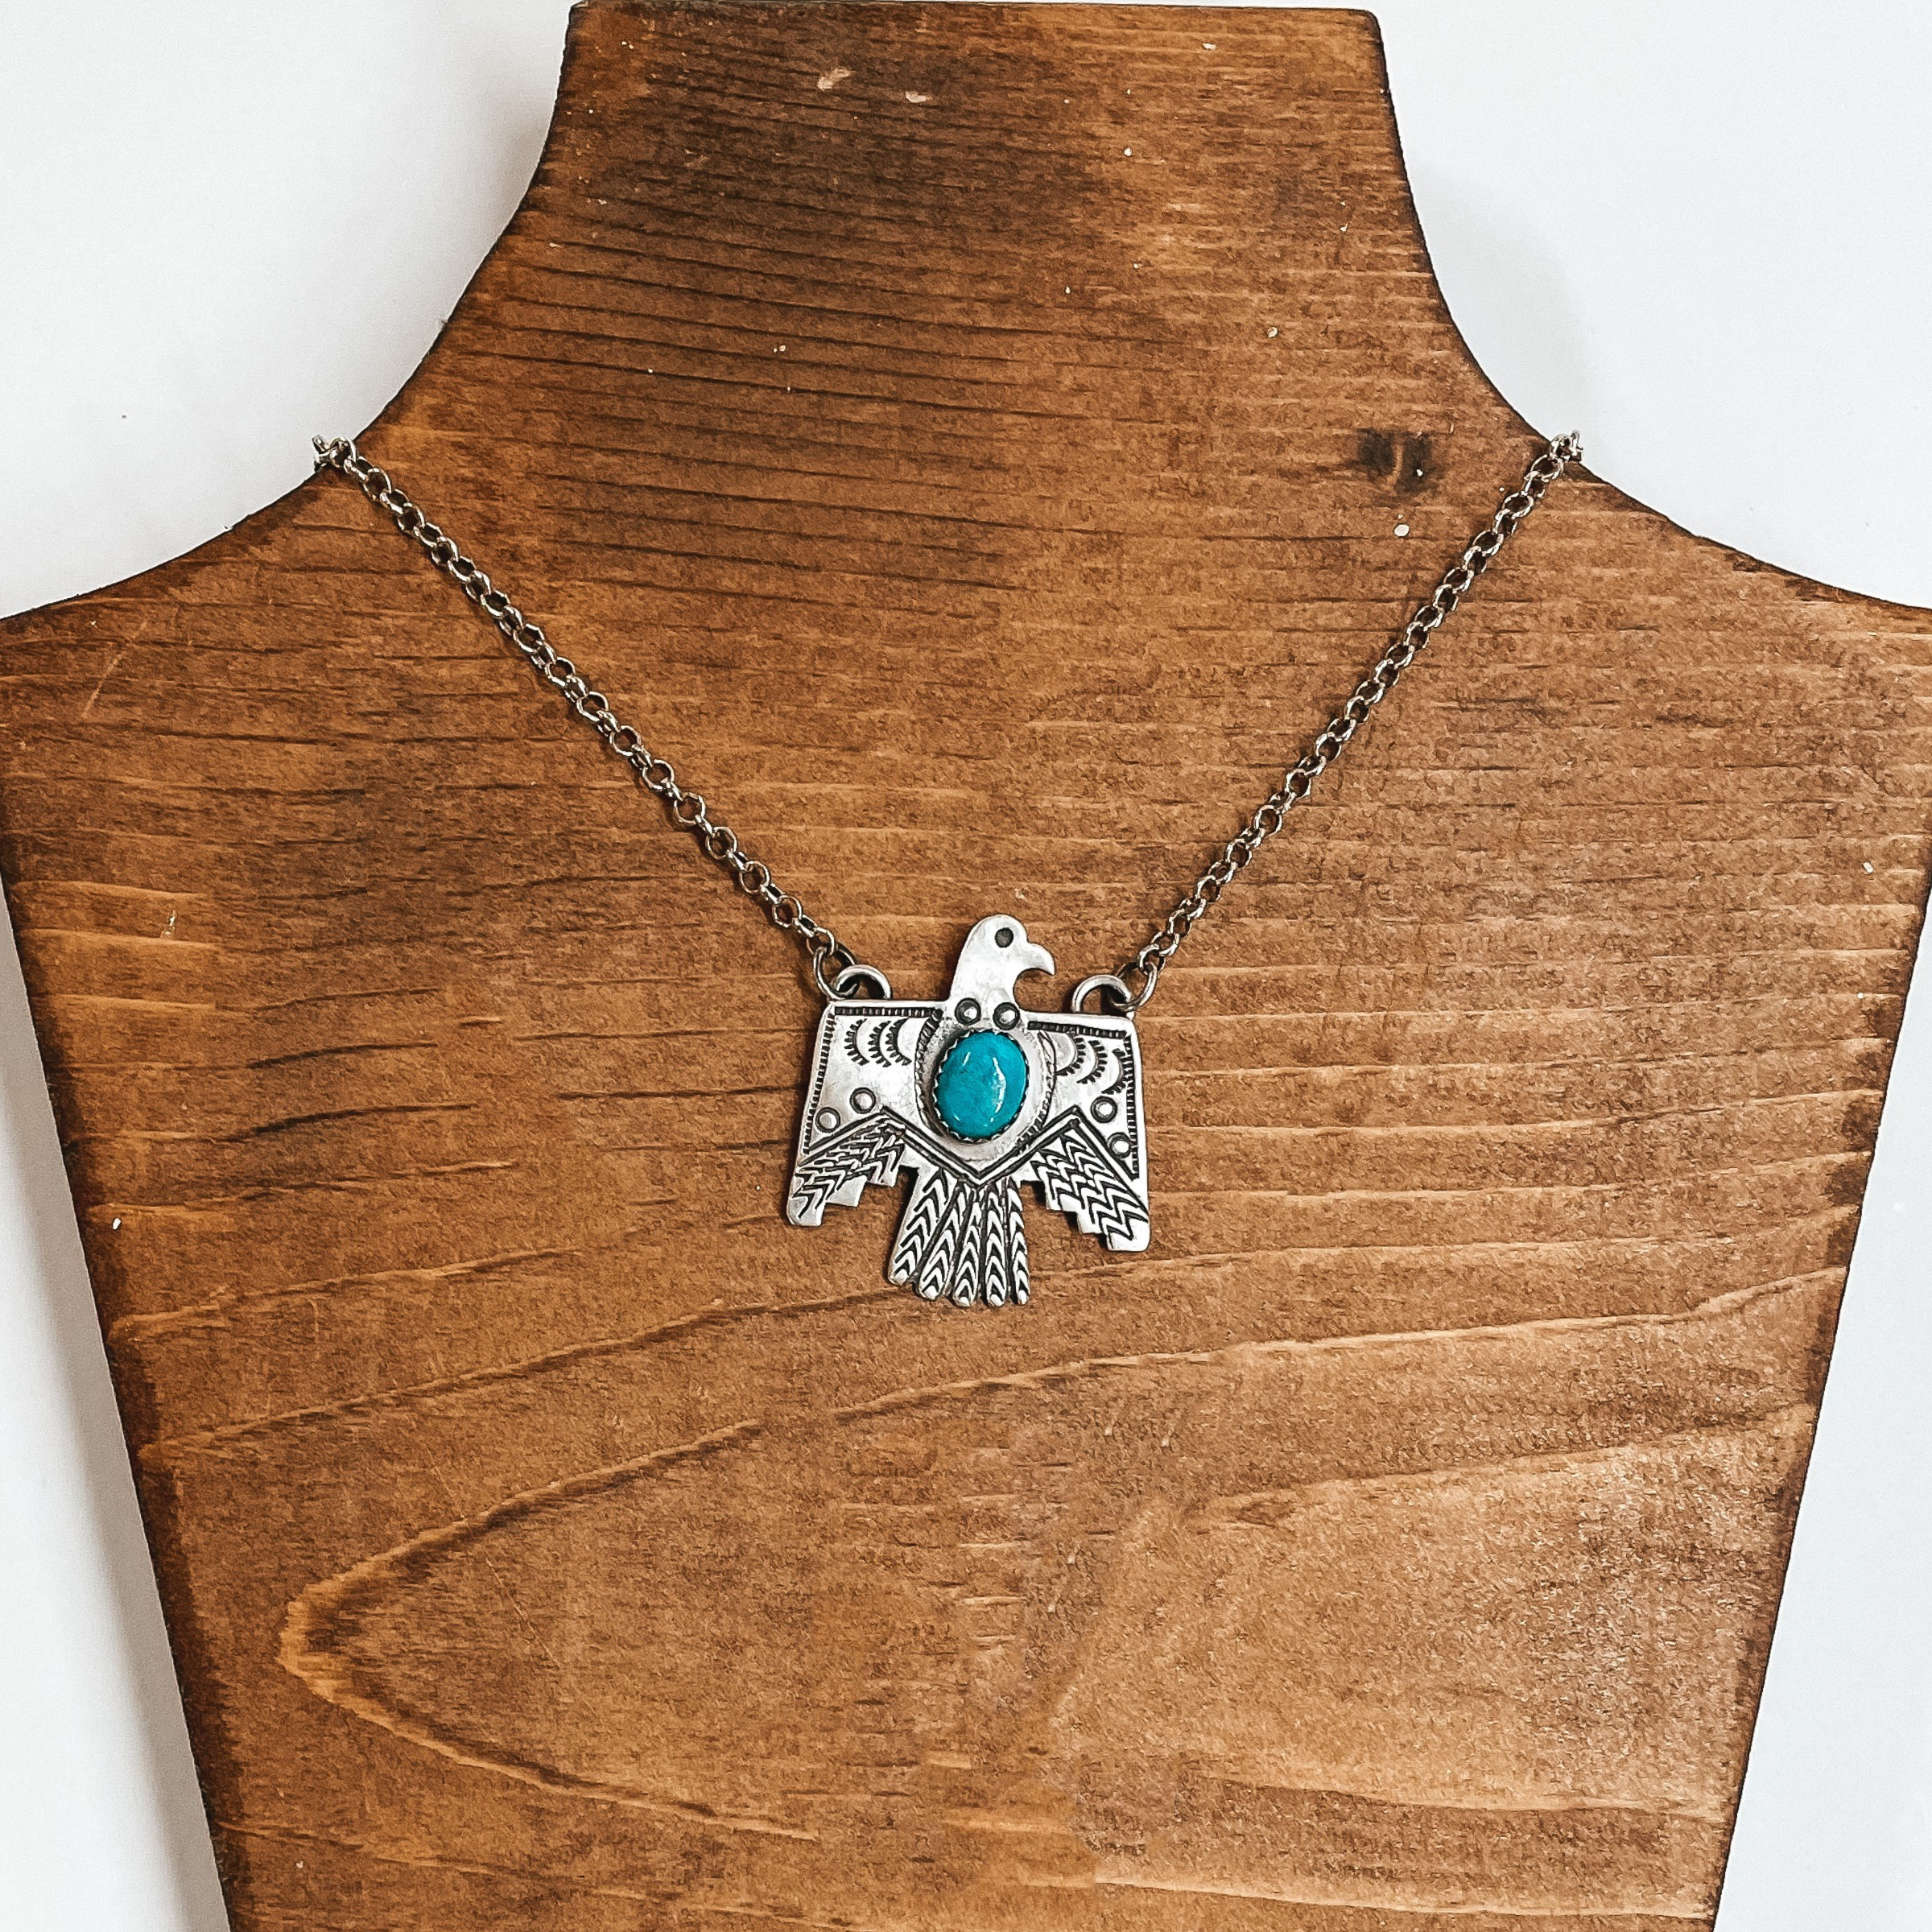 Silver chain necklace with a silver, thunderbird pendant. The thunderbird pendant has a center turquoise stone. This necklace is pictured on a wood necklace holder on a white background. 